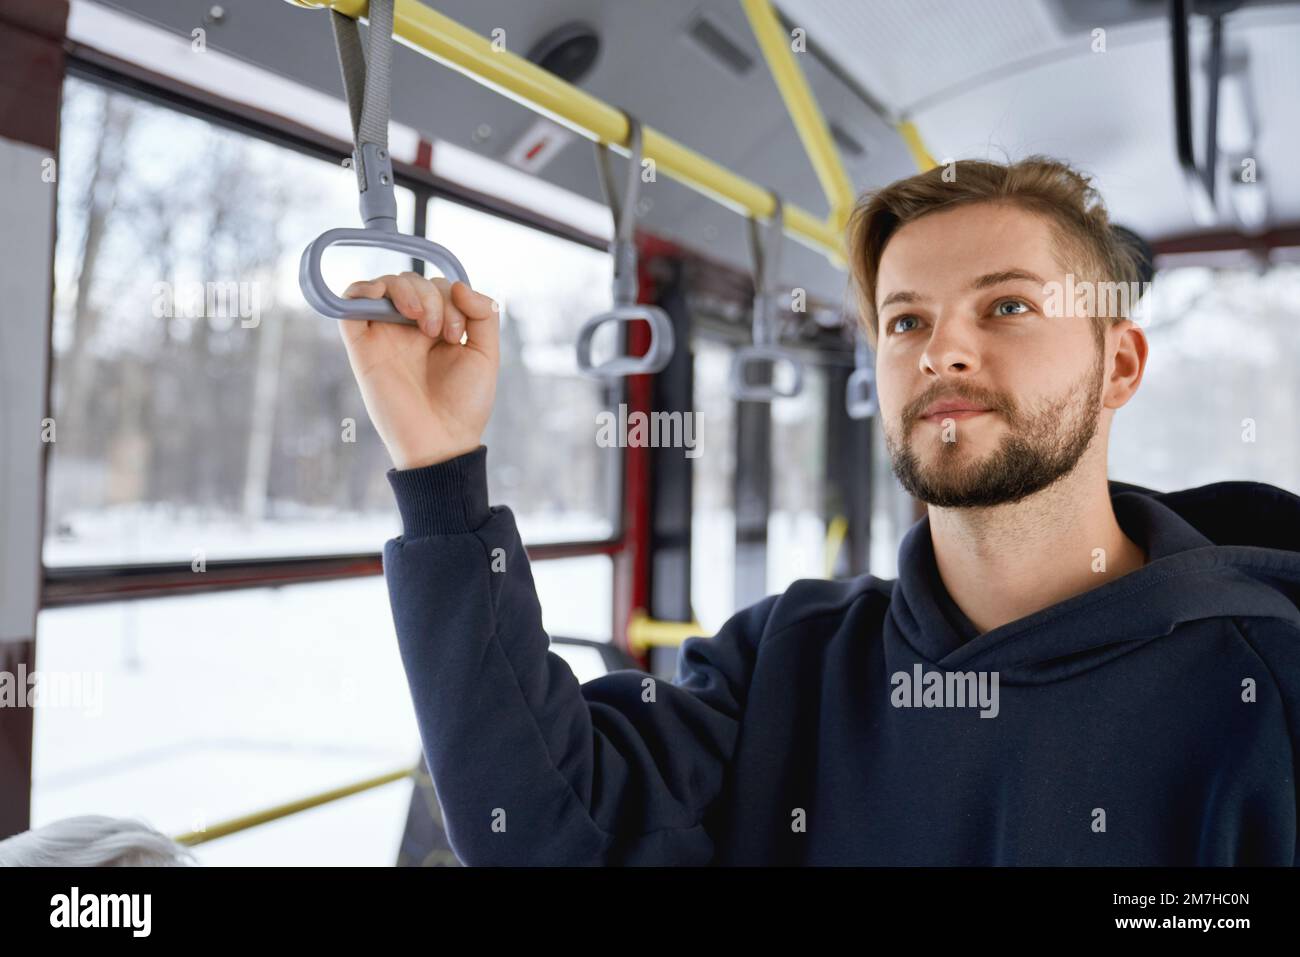 Front view of young male with beard going to work by public transport, standing on bus, waiting. Brunette man holding handle, wearing black khudi. Concept of everyday routine. Stock Photo